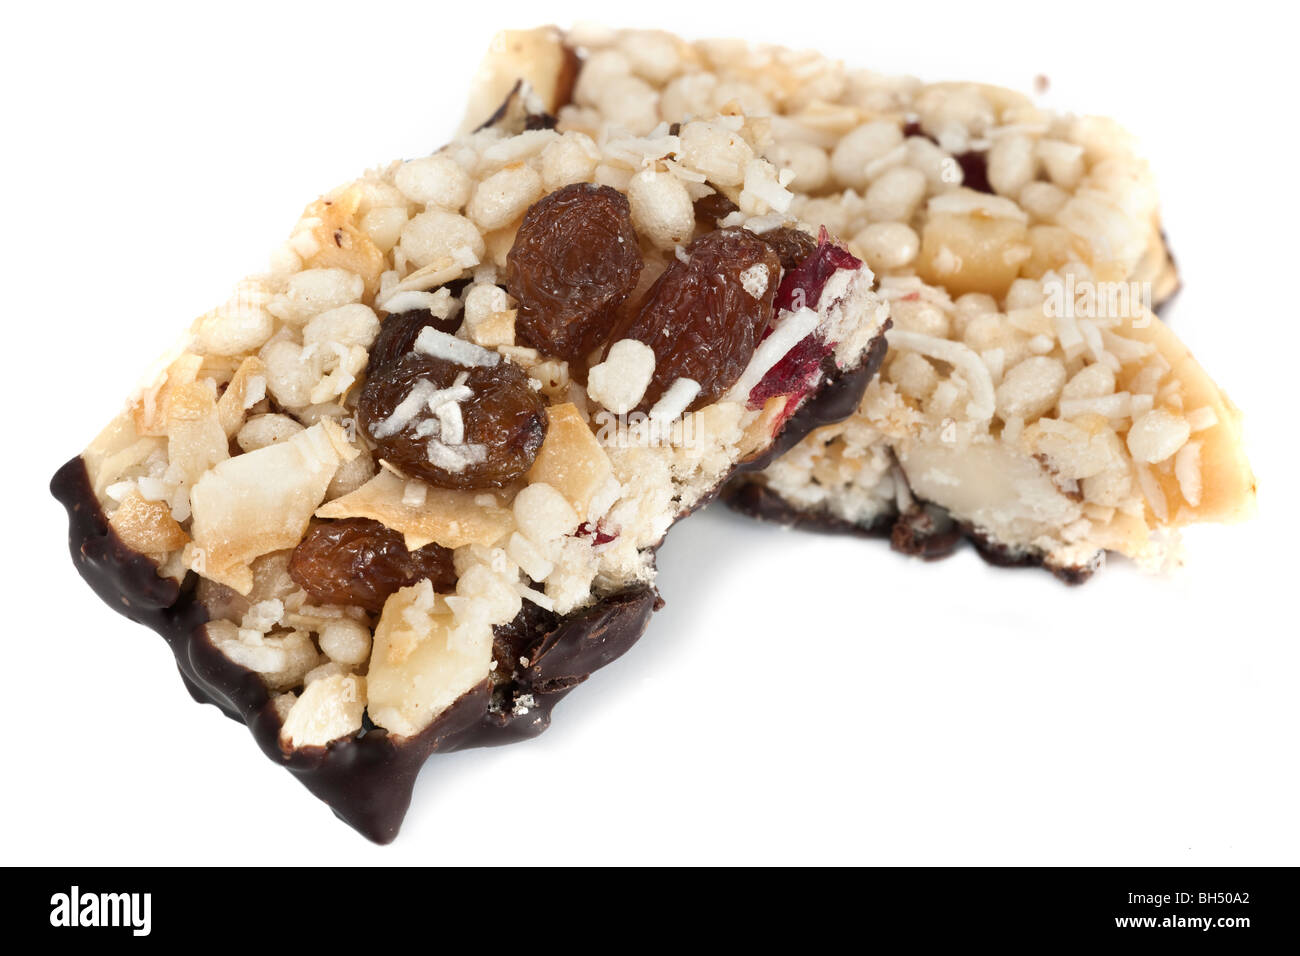 Close up of a broken halved Fruit, nut and chocolate healthy eating bar Stock Photo